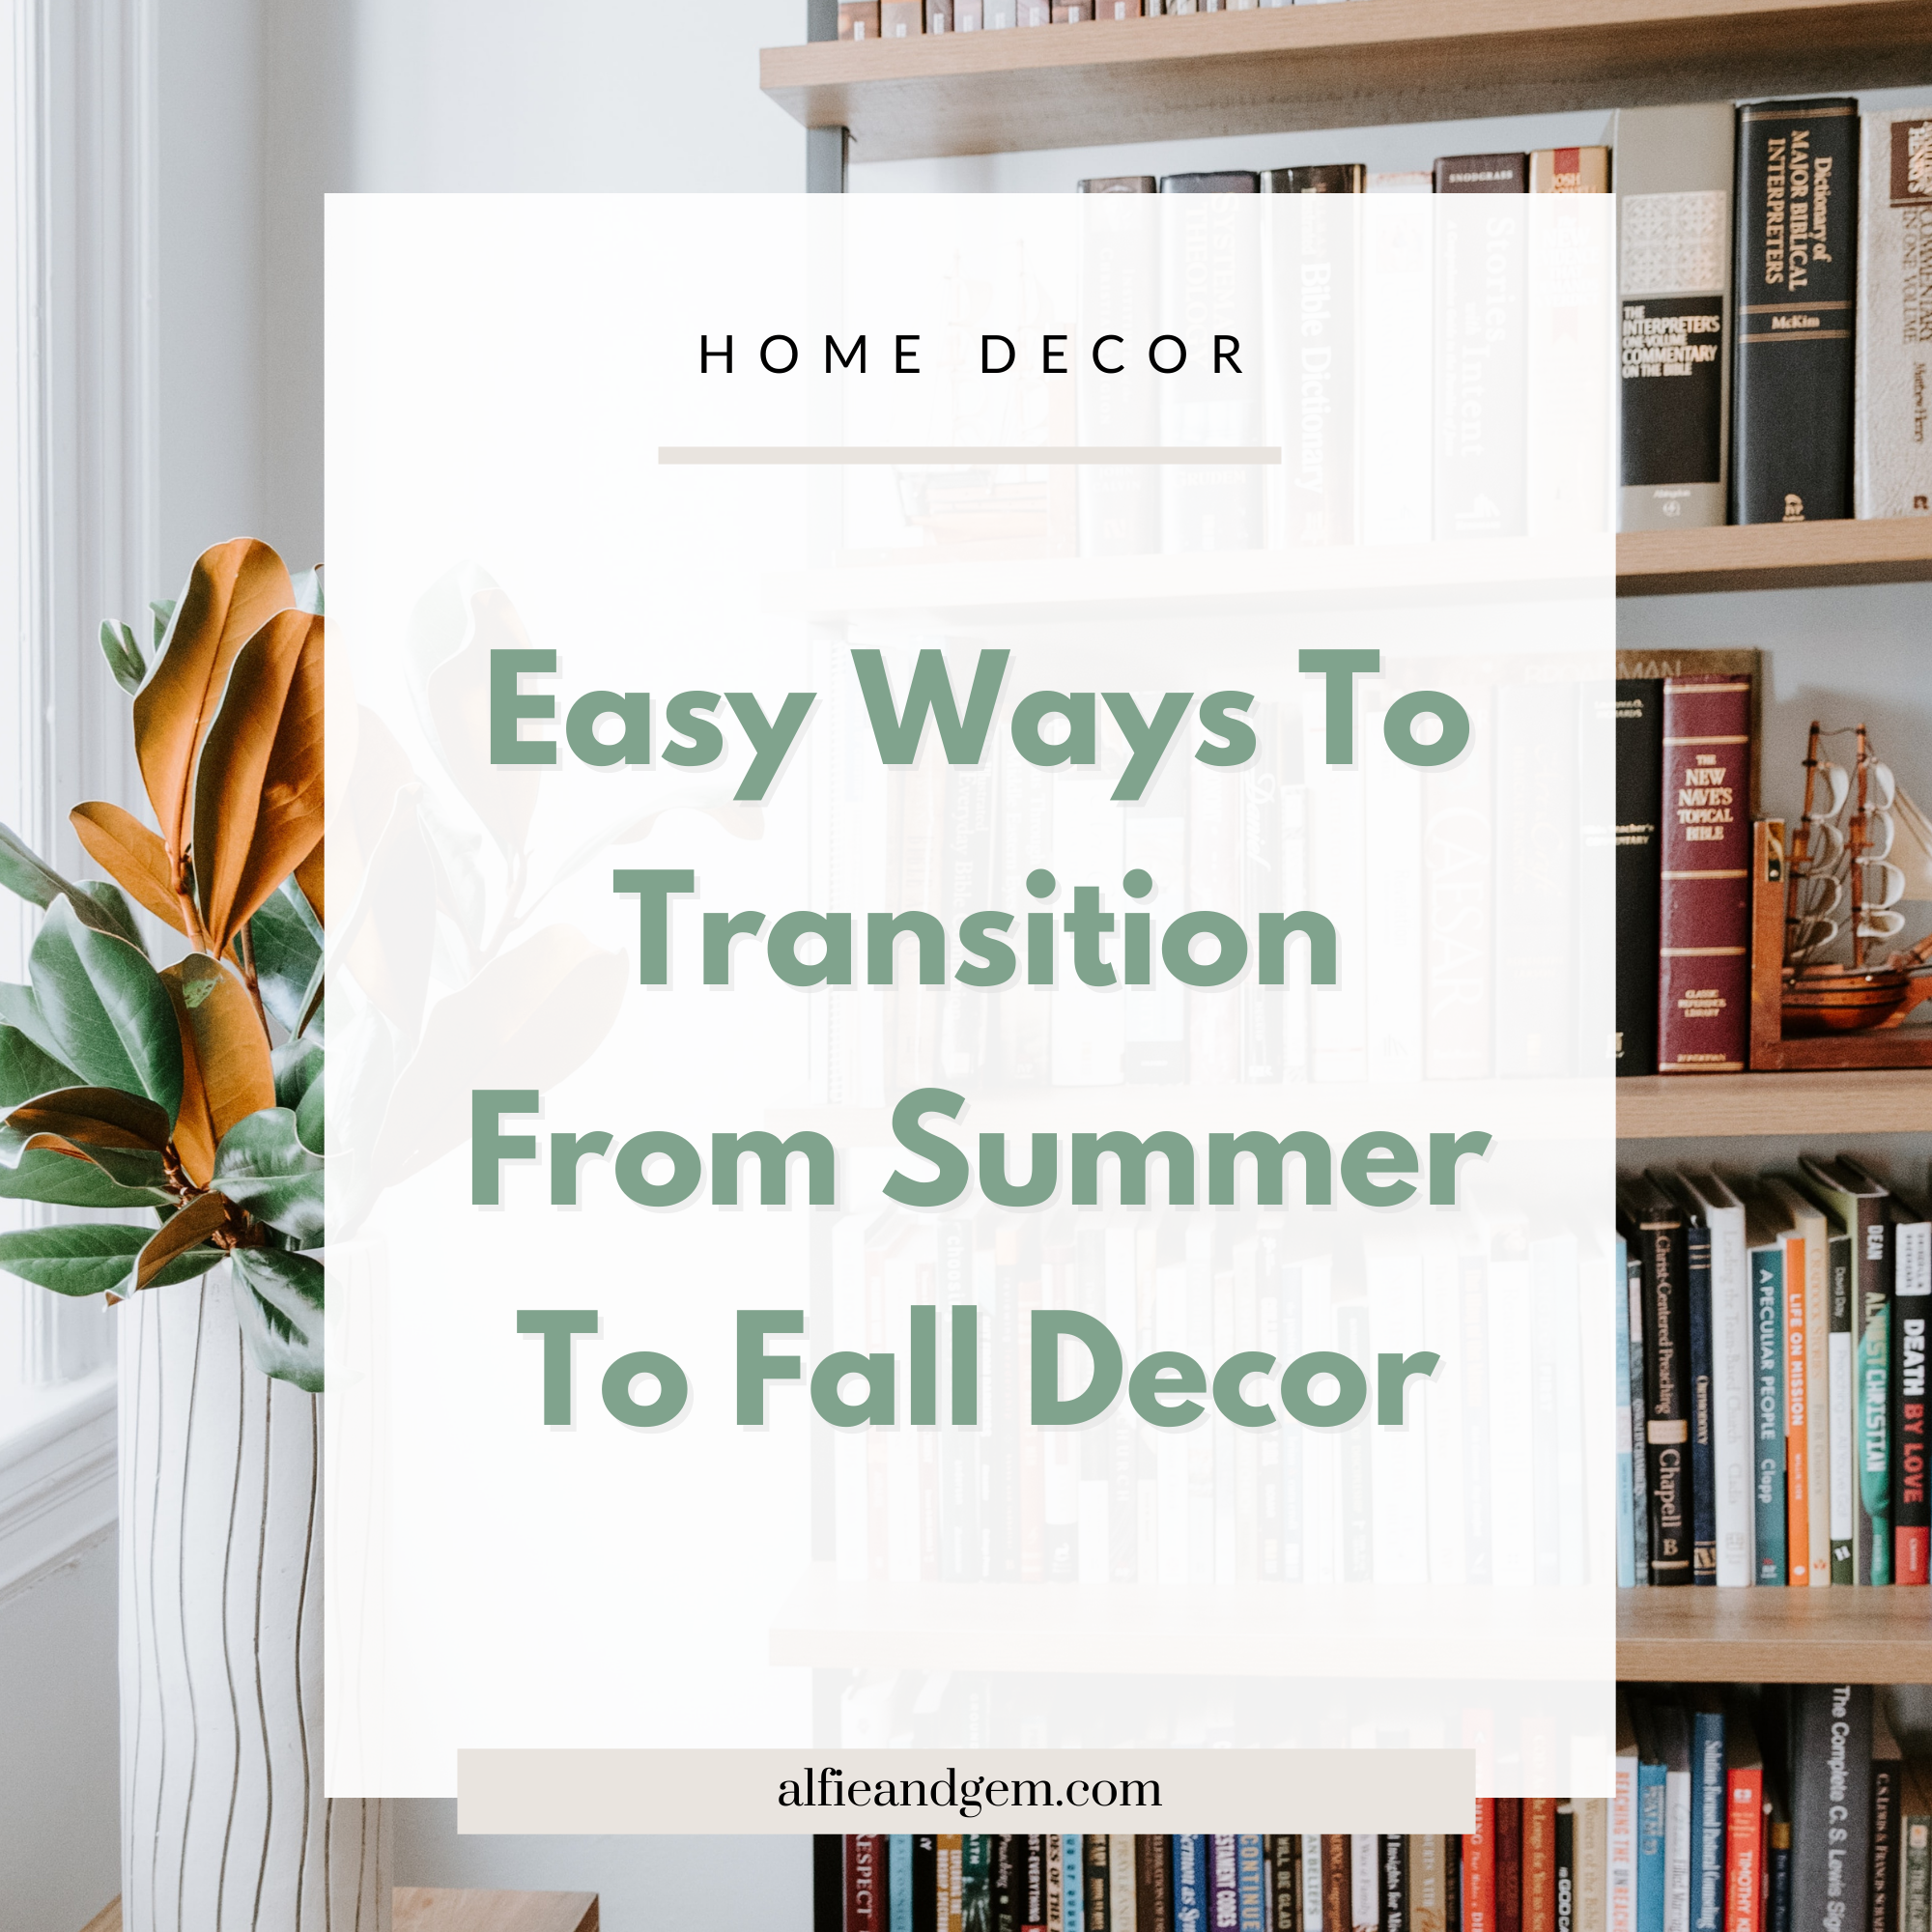 6 Easy Ways To Transition Your Home From Summer to Fall Decor